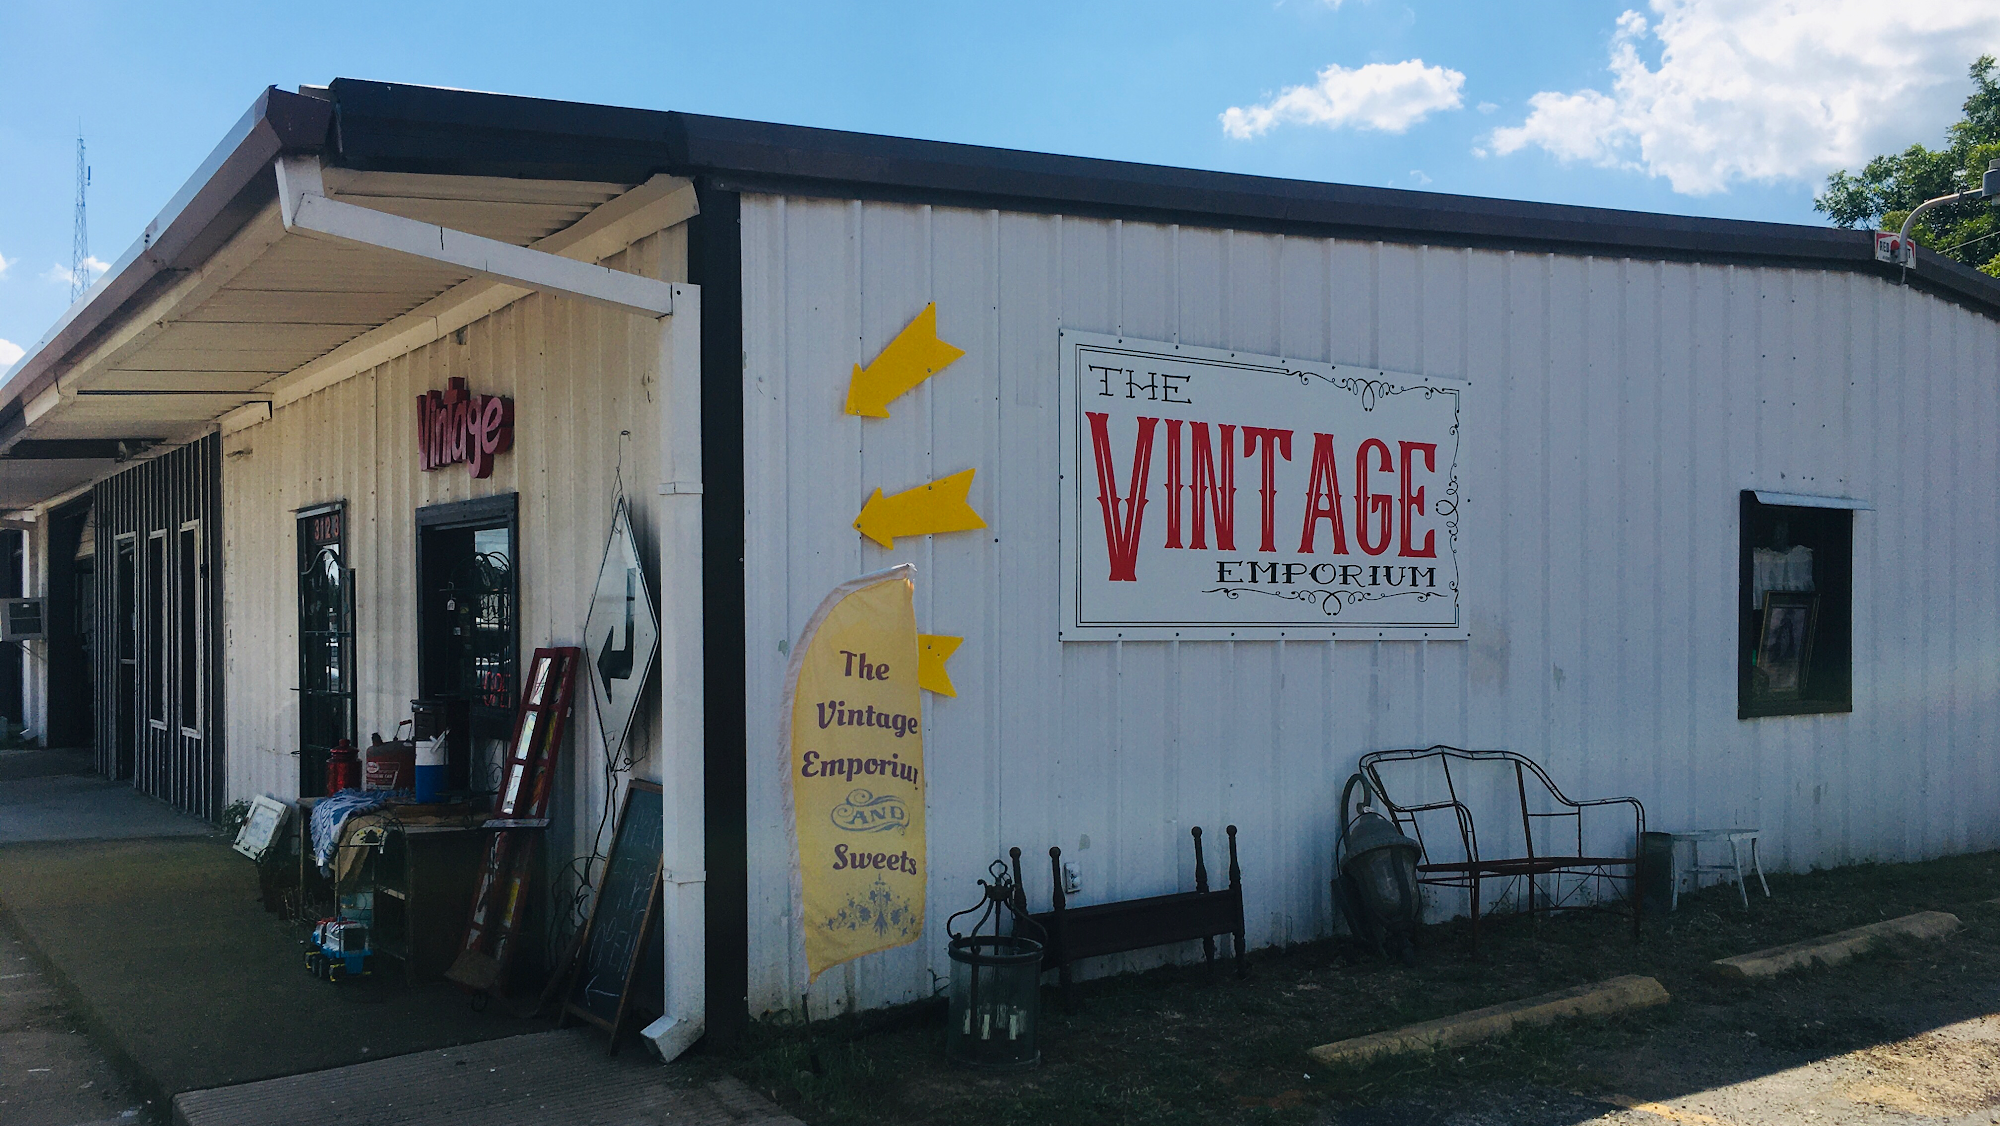 The Vintage Emporium and Sweets